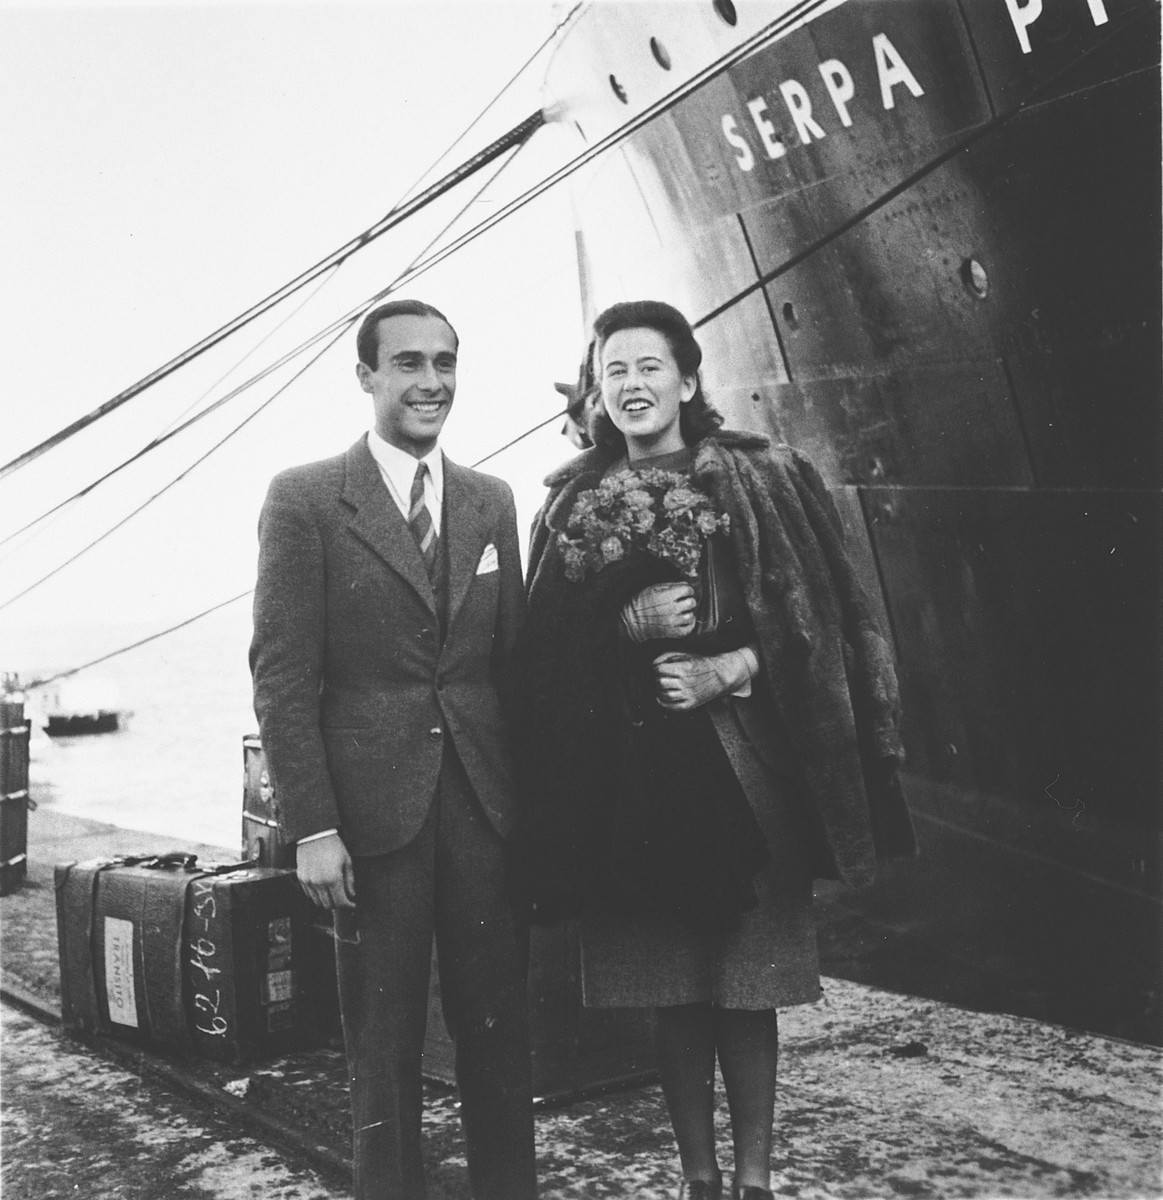 A Jewish refugee couple poses on the pier in the port of Lisbon before boarding the SS Serpa Pinto.

Pictured is Madeleine Hecht Feher and boyfriend, Rui Furerstenau who accompanied Madeleine to the ship to say goodbye before she embarked.